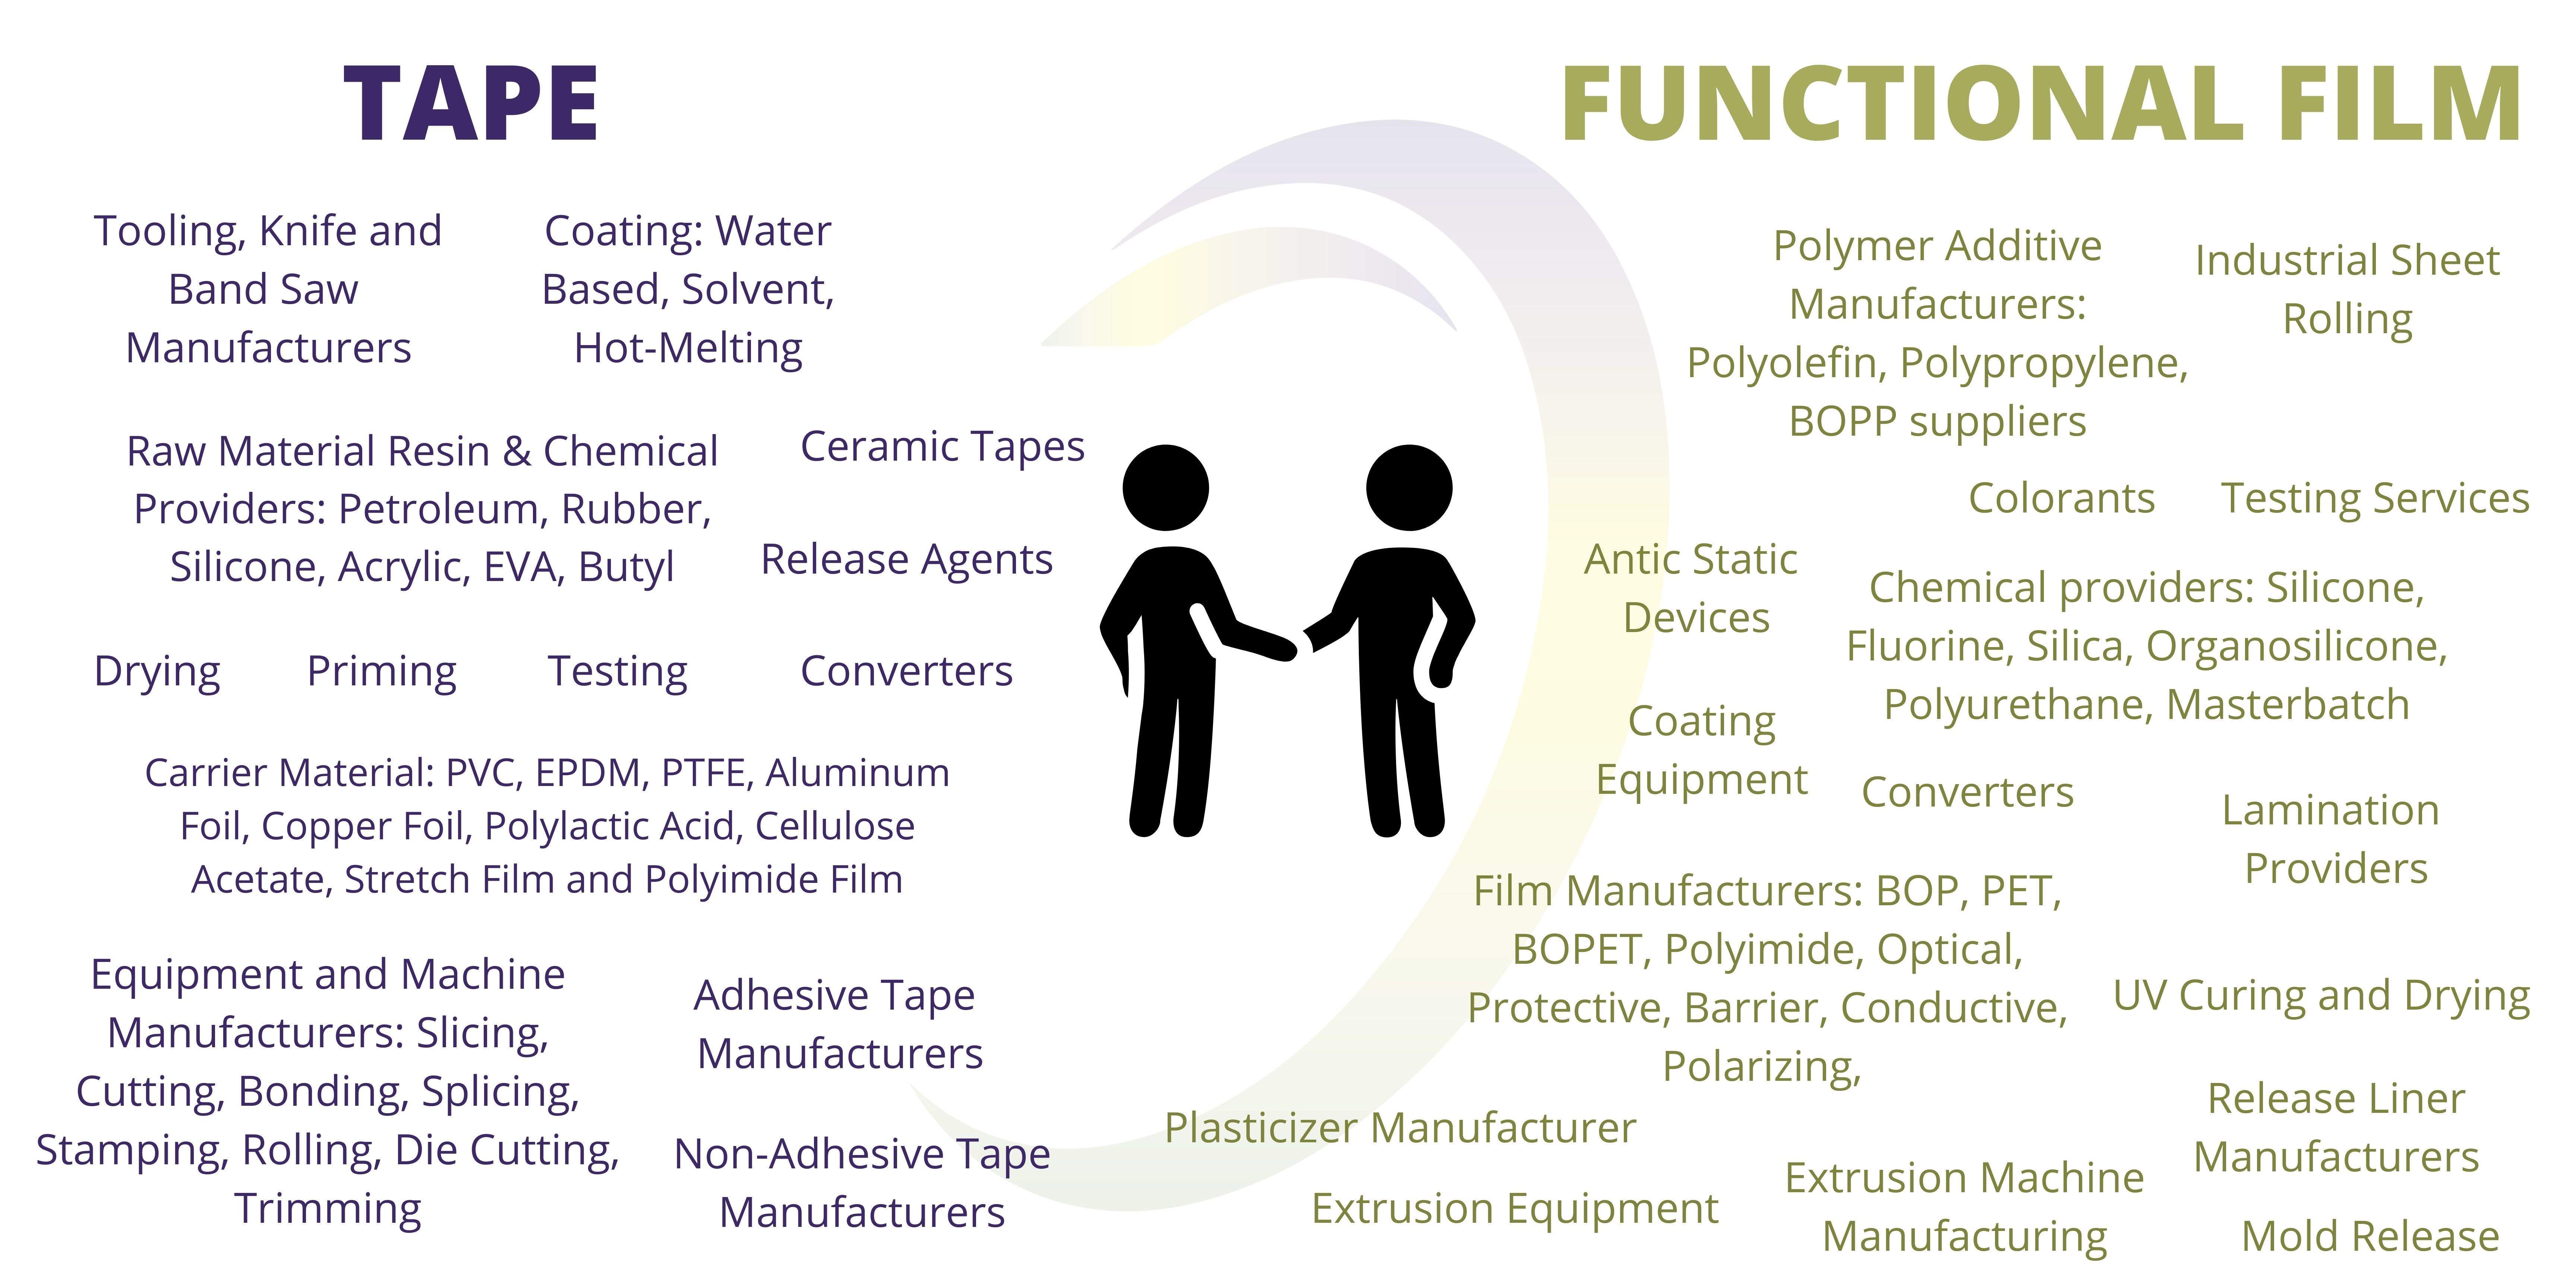 List of target exhibitors for the Tape & Functional Film Expo USA. Target exhibitors include: coated tape, tape adhesive, chemical providers, functional film and much more.